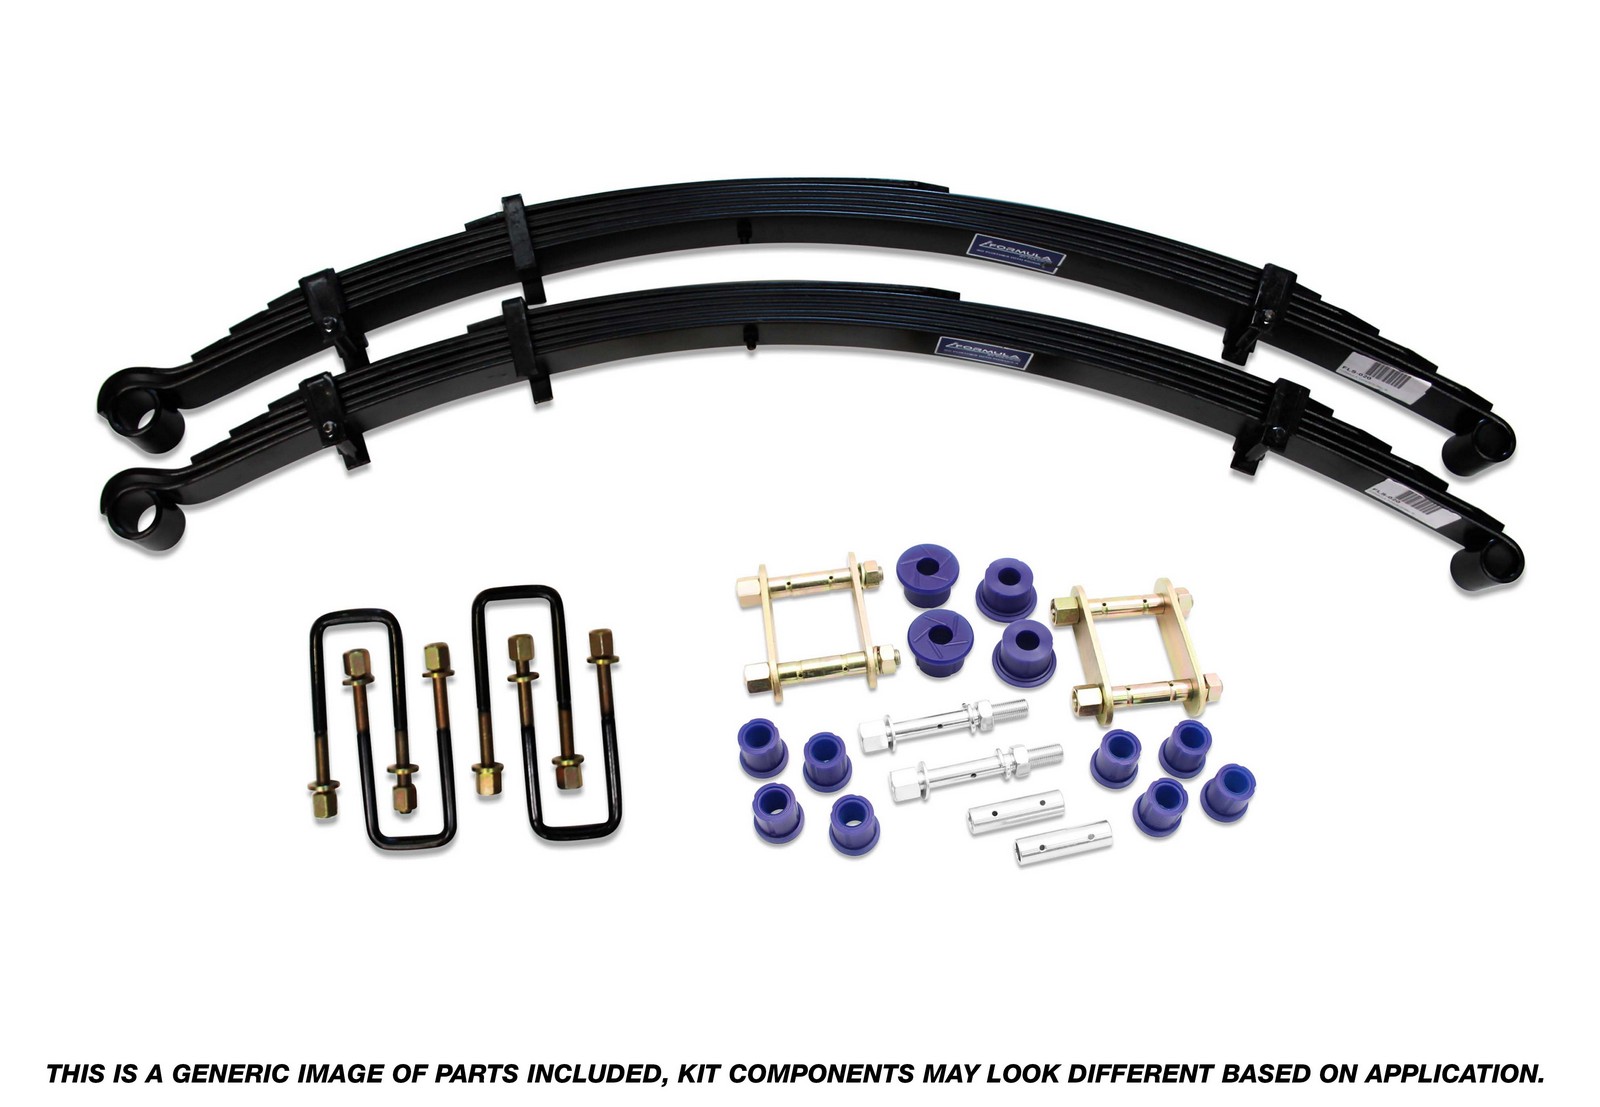 Formula Rear Leaf Spring Kit - 40mm lift at 300kg to suit Holden Colorado 2008-2012, Isuzu D-Max 2002-2012 & Great Wall V240 2009-2015